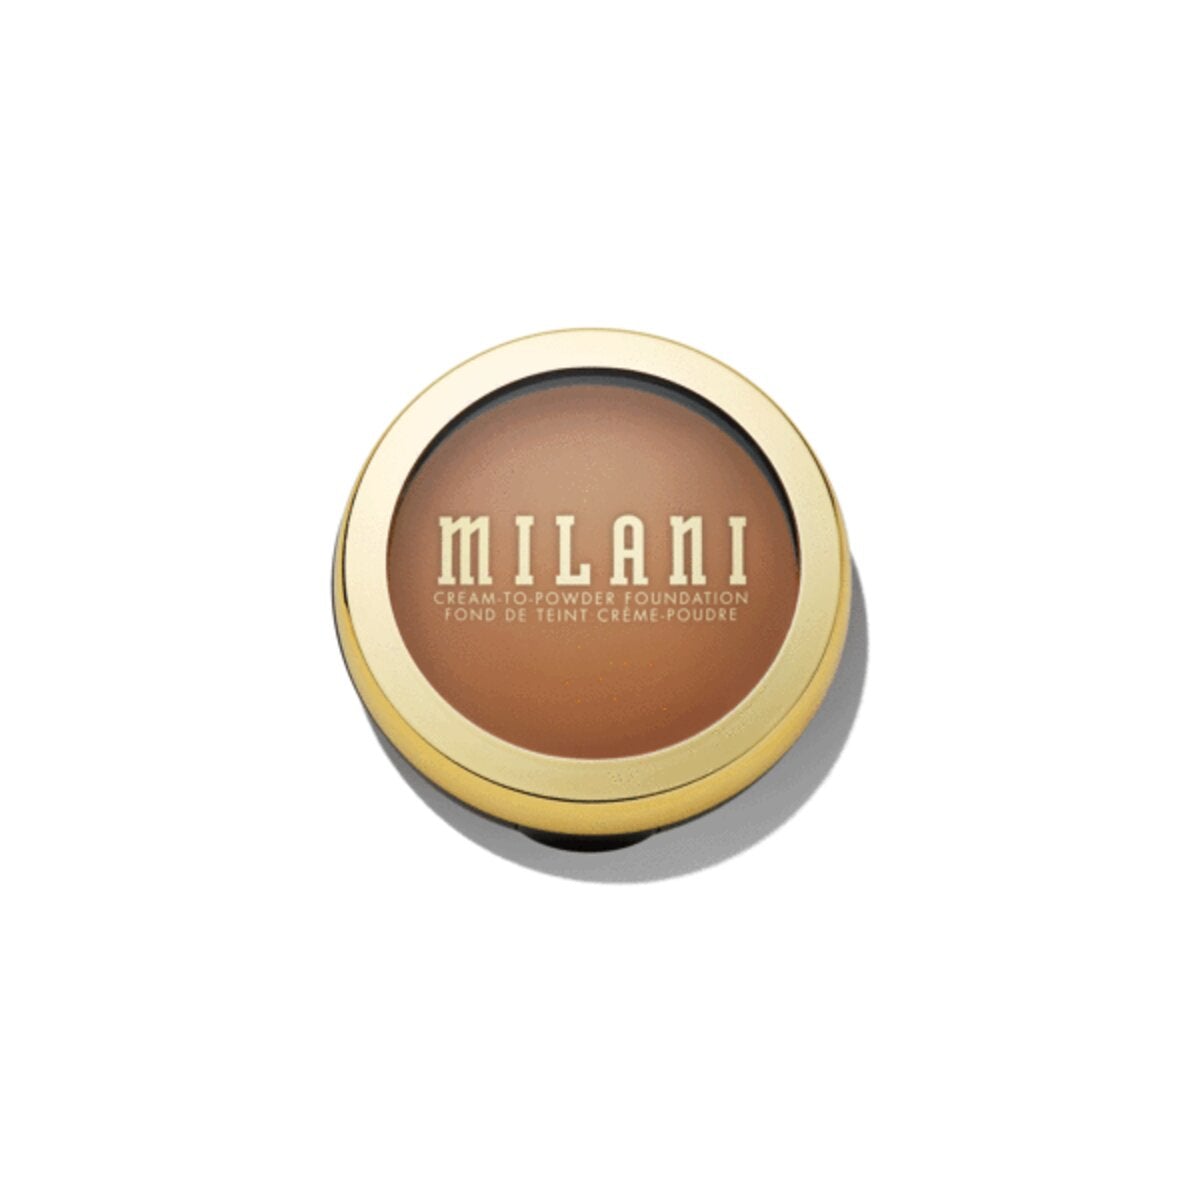 CONCEAL AND PERFECT CREAM TO POWDER FOUNDATION SPICE ALMOND - MILANI